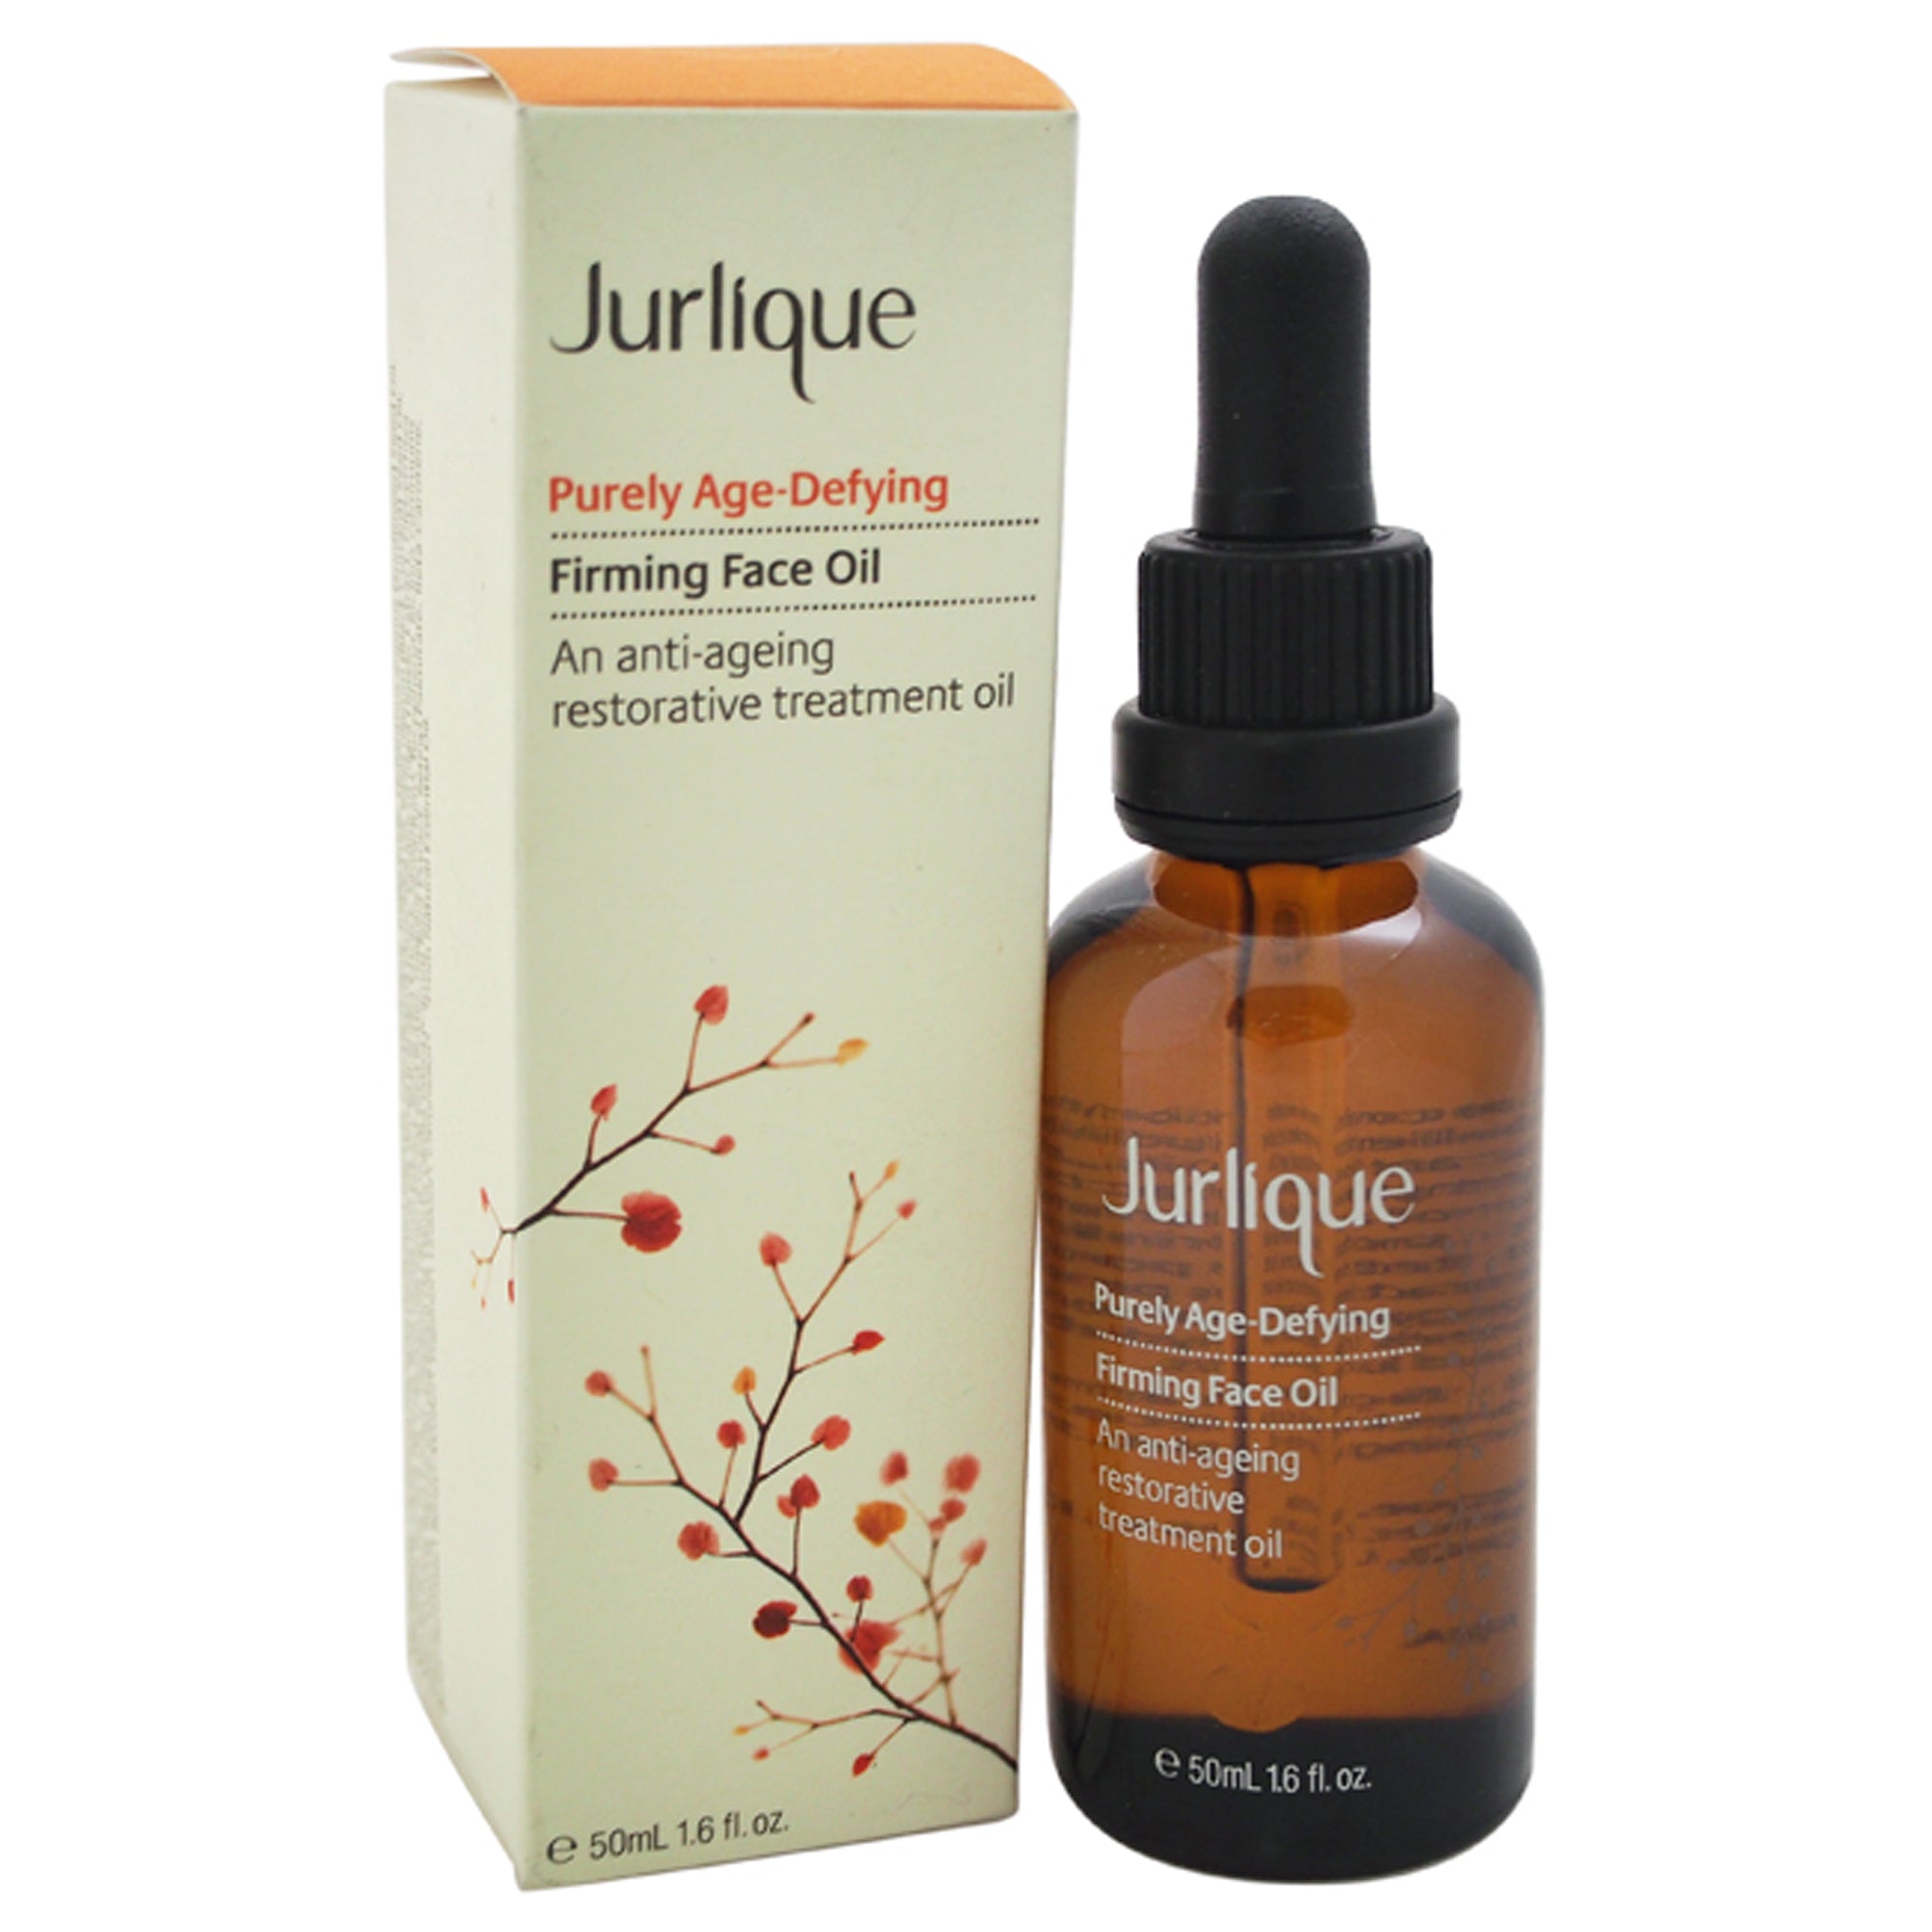 Purely Age Defying Firming Face Oil by Jurlique for Women - 1.6 oz Oil